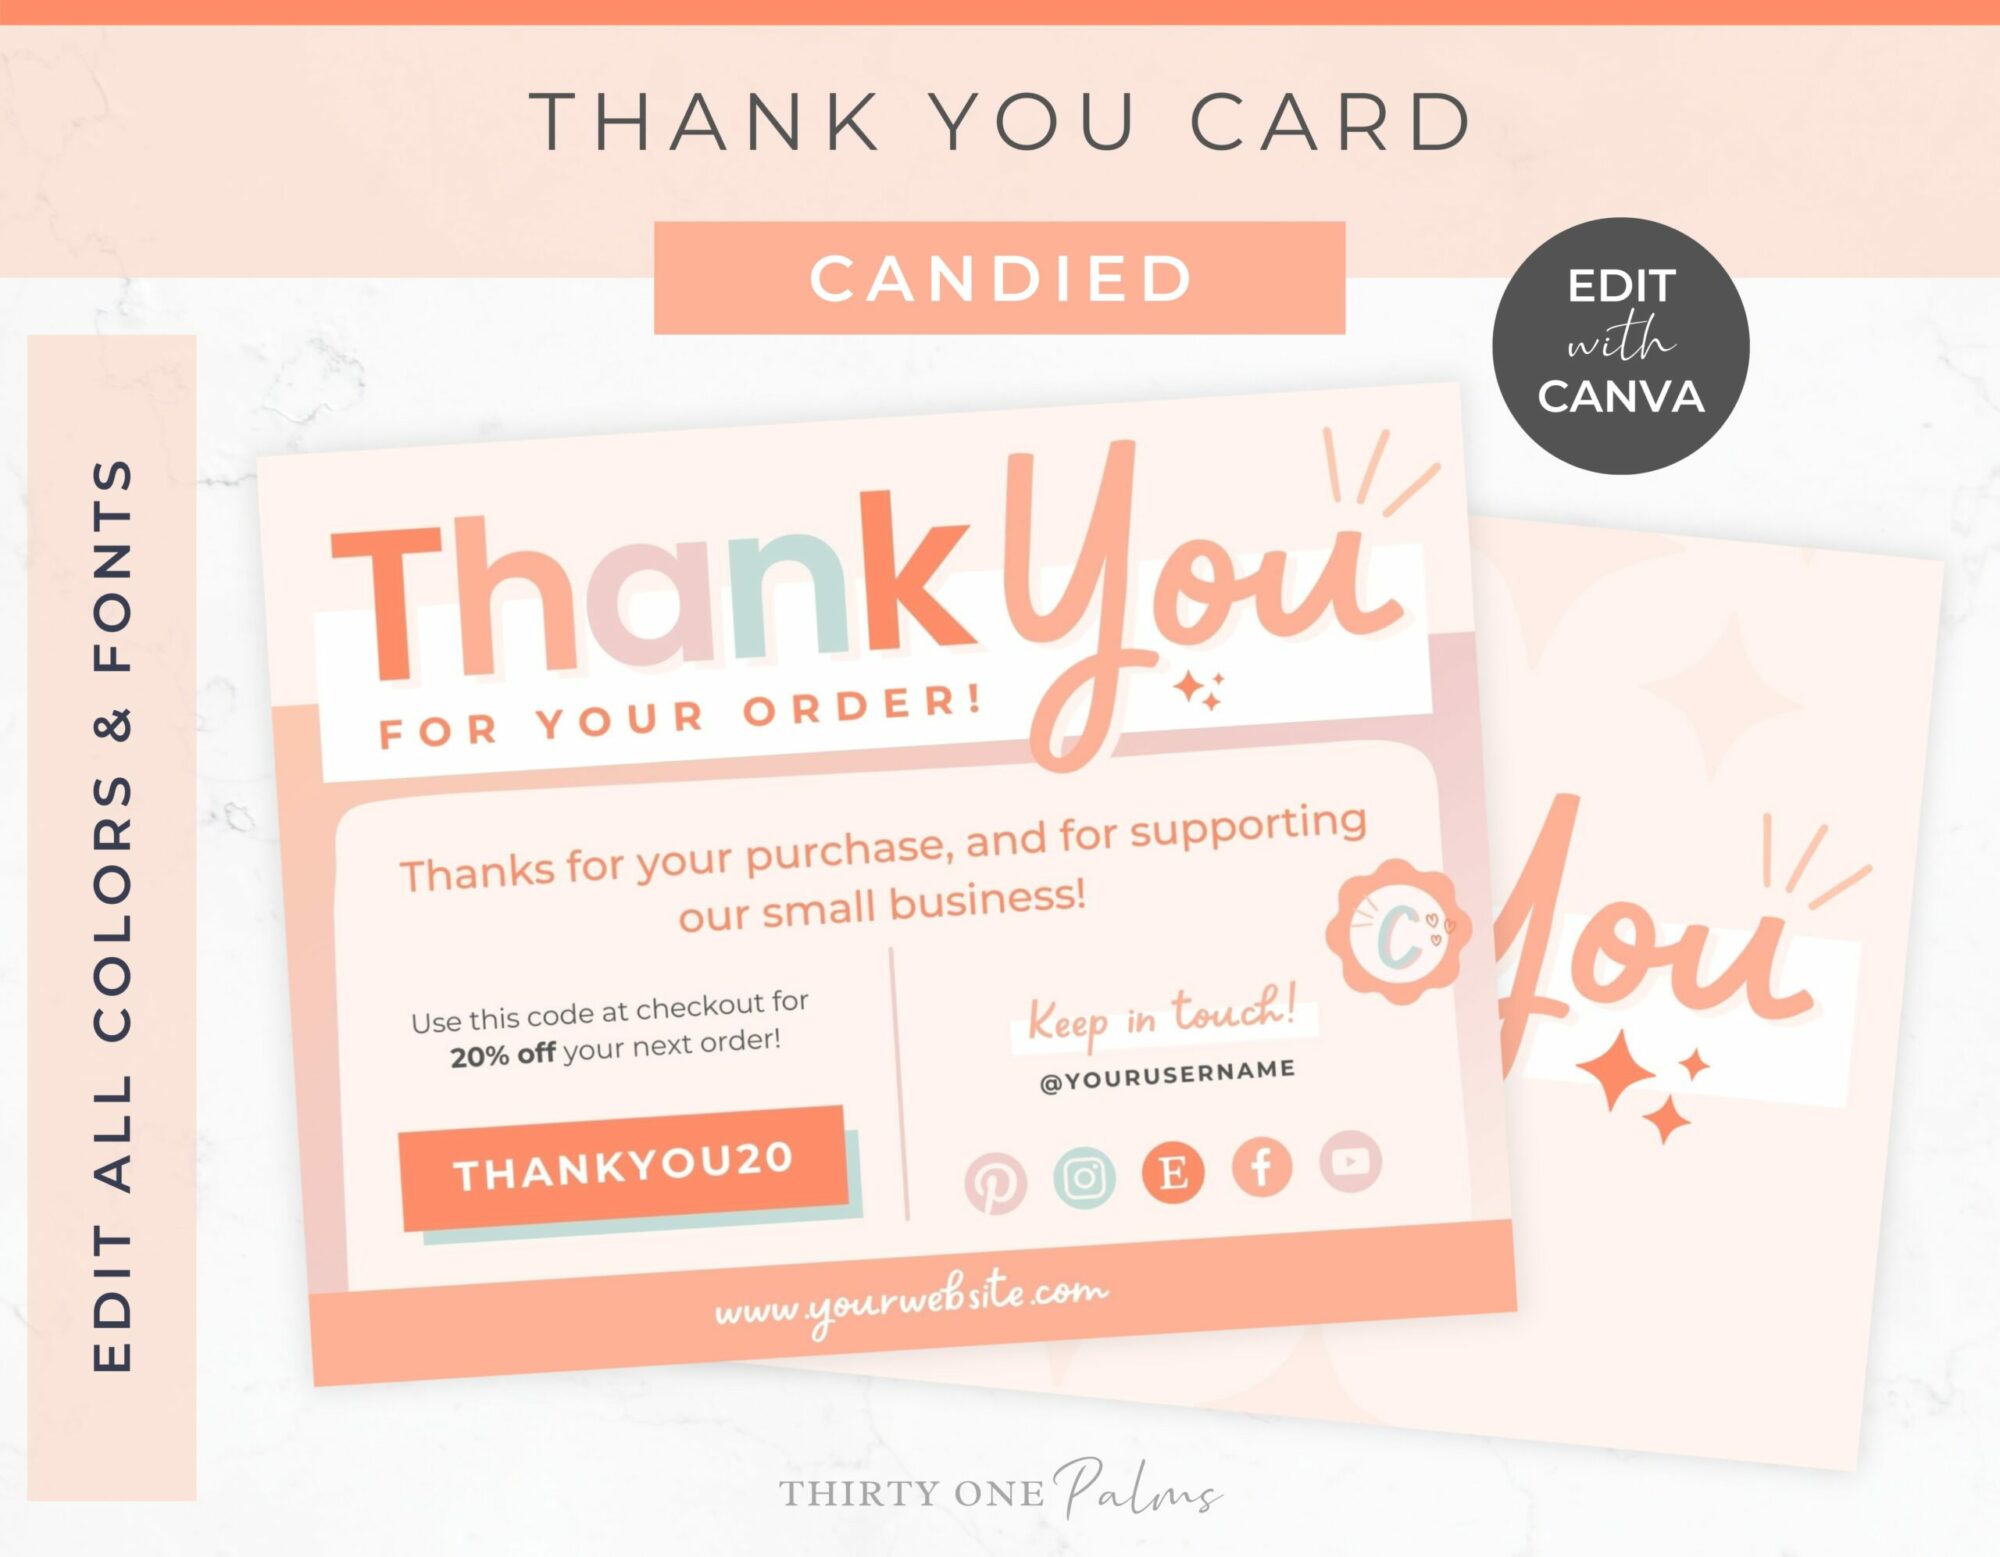 Thank You Order Card for Canva – Candied